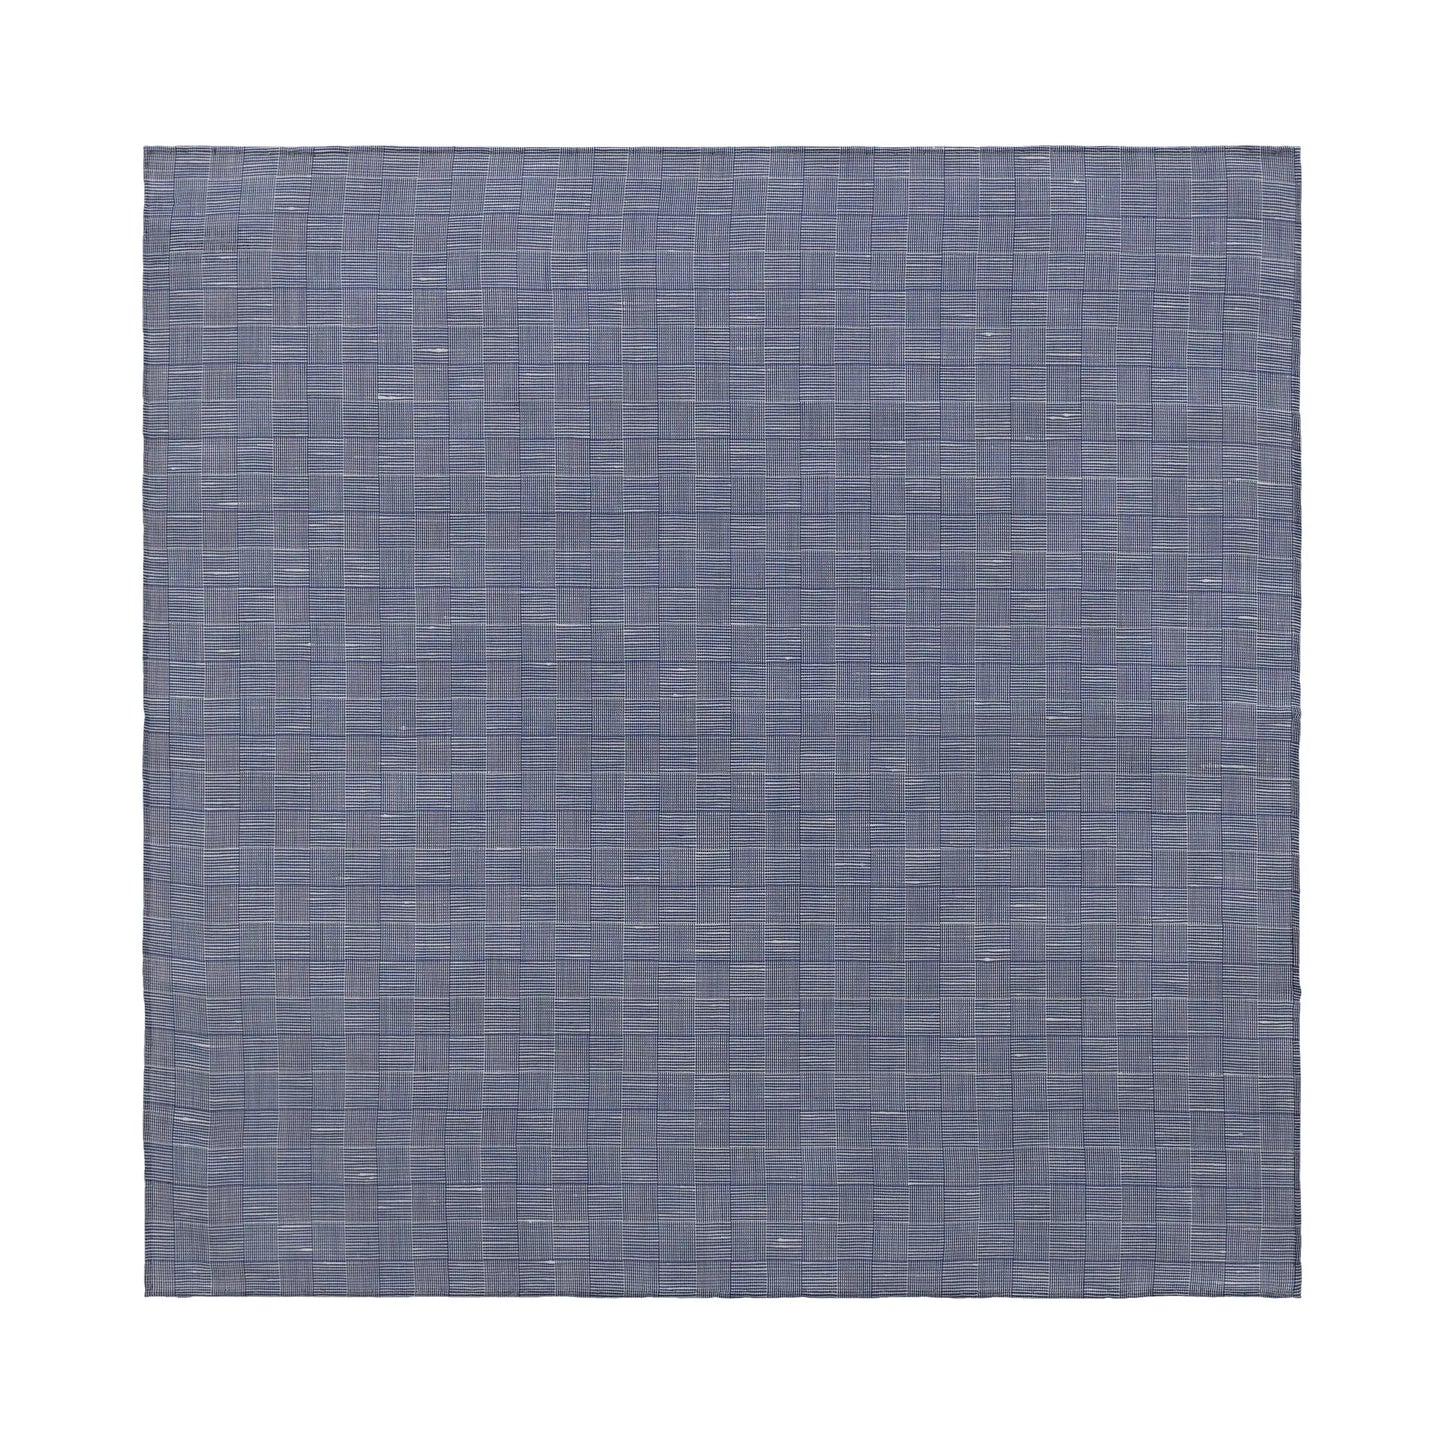 Checked Cotton-Blend Pocket Square in Greyish Blue